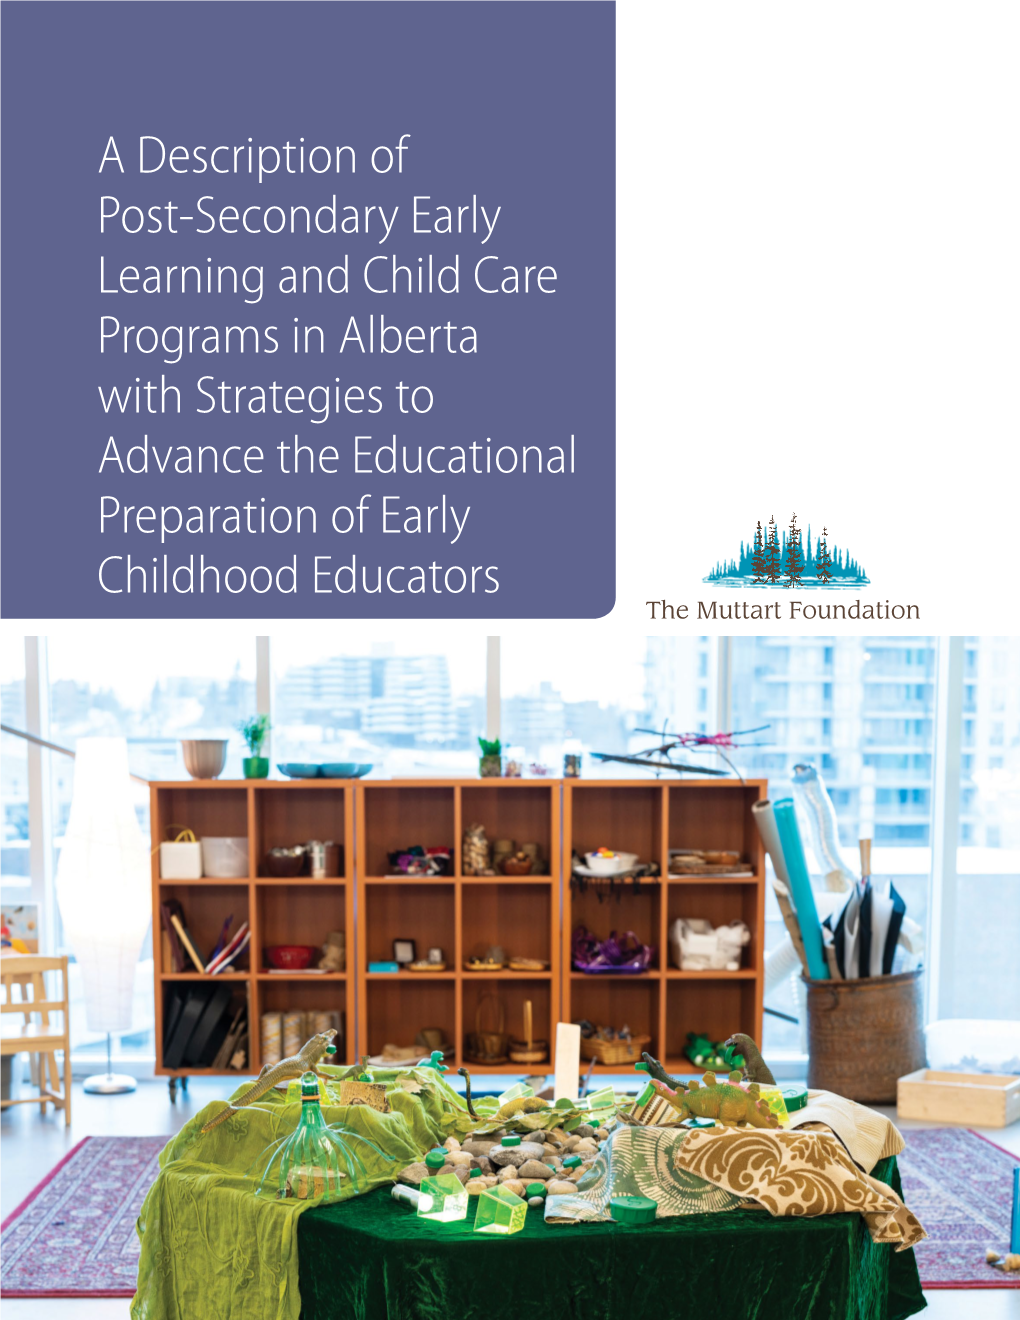 A Description of Post-Secondary Early Learning and Child Care Programs